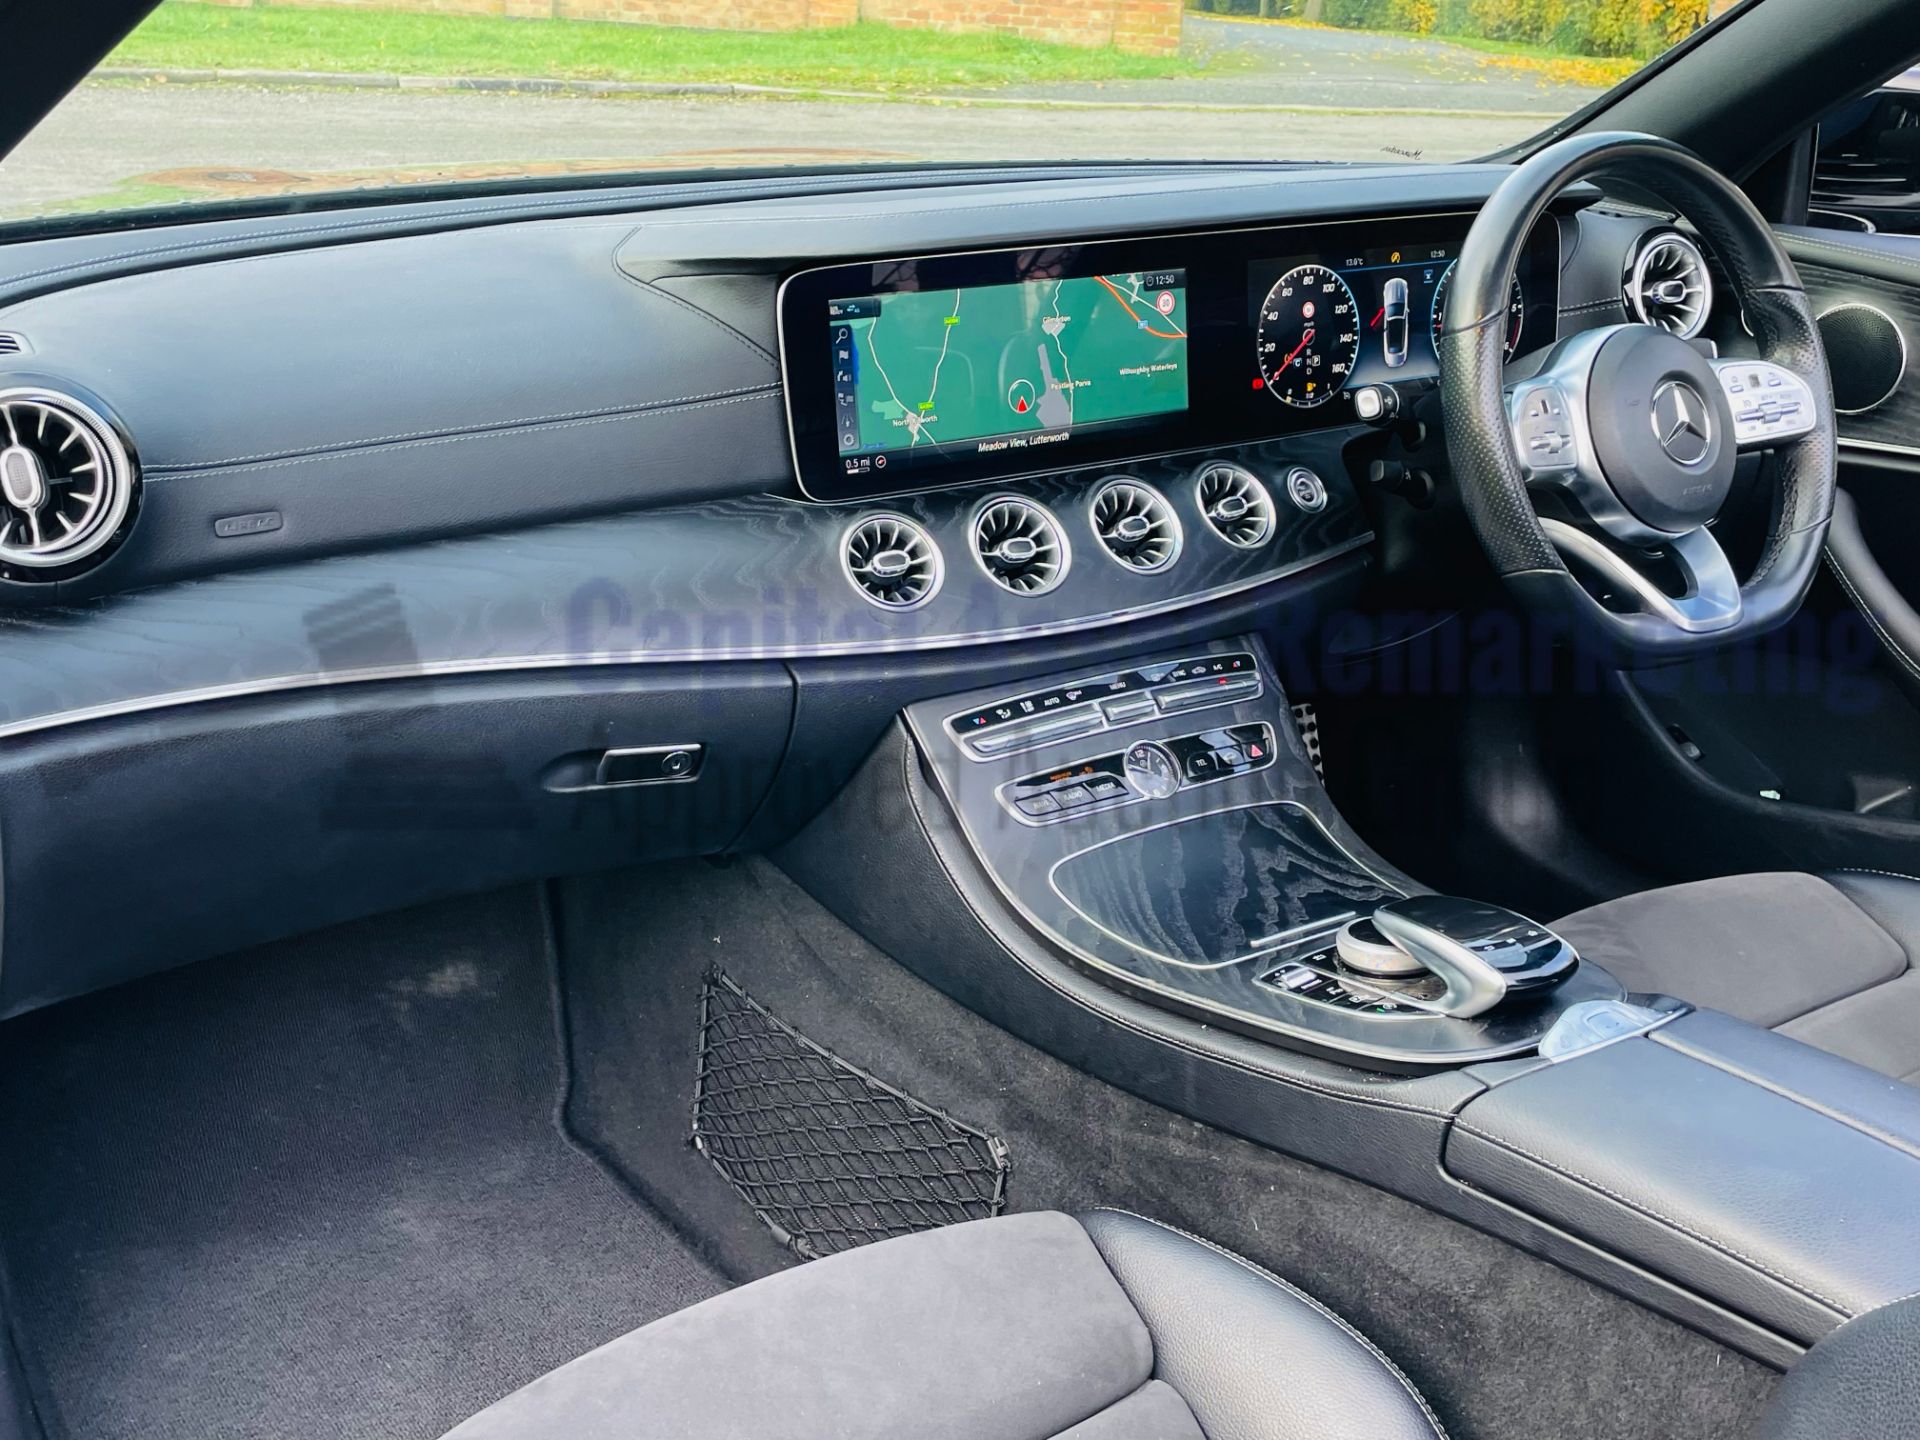 MERCEDES-BENZ E220d *AMG LINE - CABRIOLET* (2019 - EURO 6) '9G TRONIC AUTO - SAT NAV' *FULLY LOADED* - Image 39 of 66